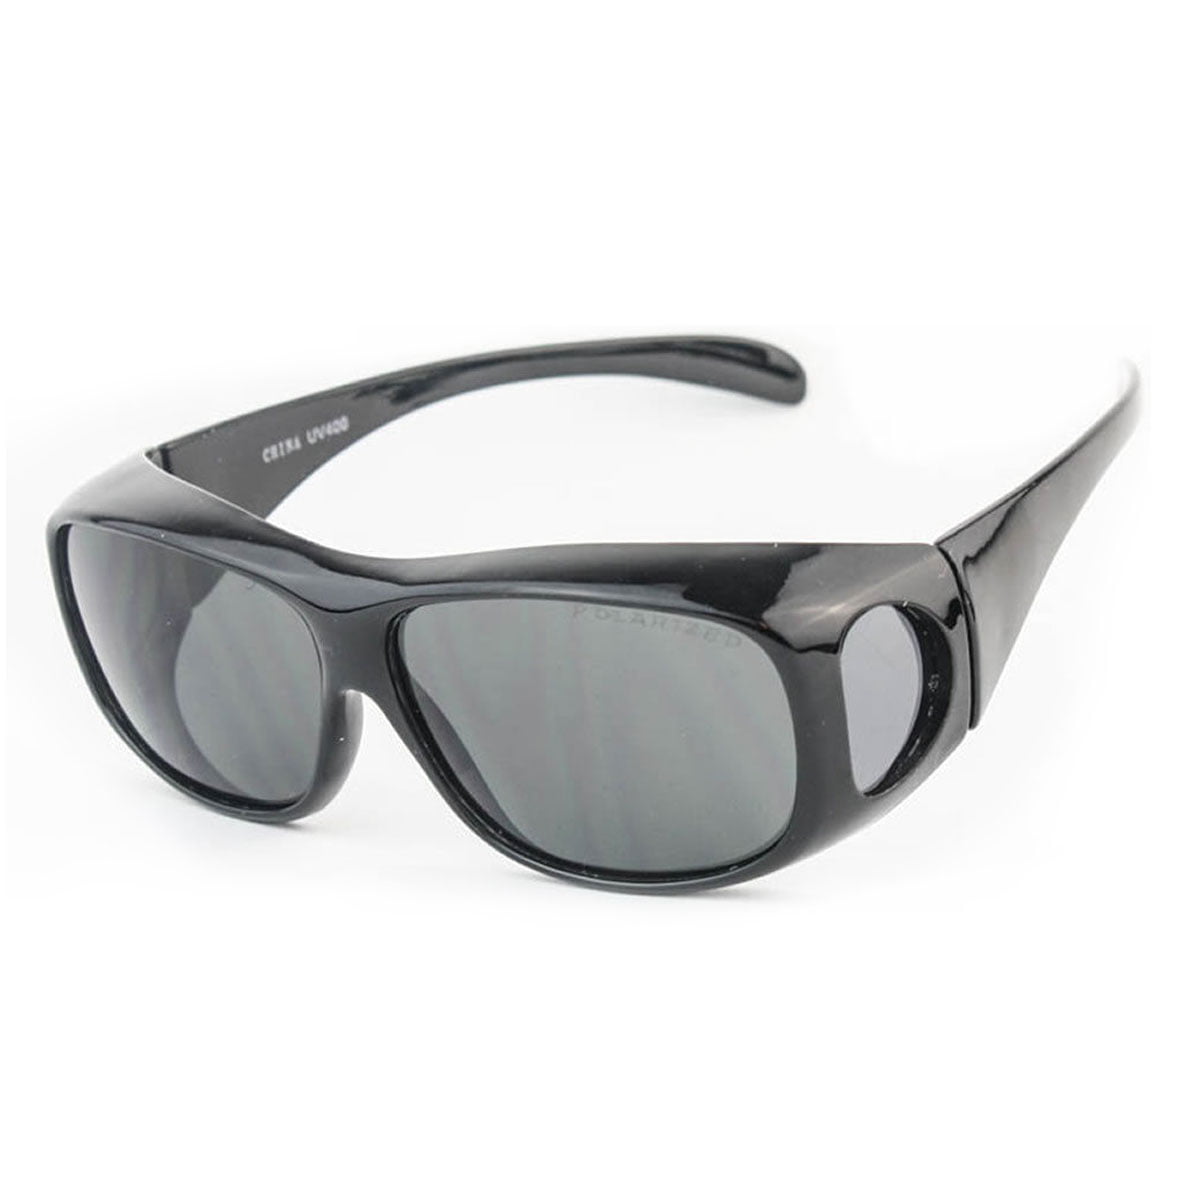 1 x Fit Over Polarized Sunglasses Cover 